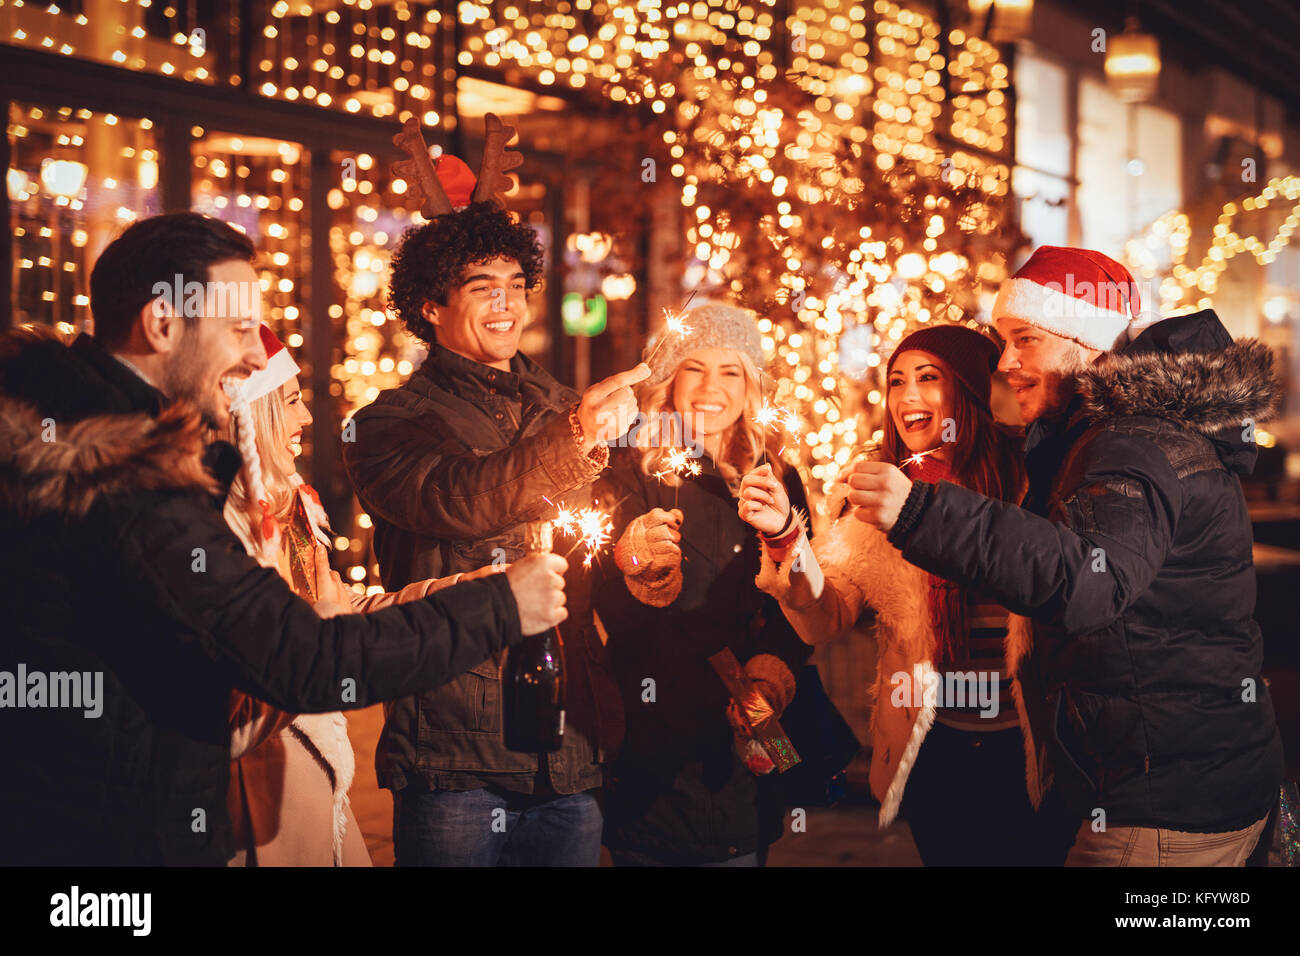 Group of happy friends having fun with sparklers on night Christmas party. Stock Photo